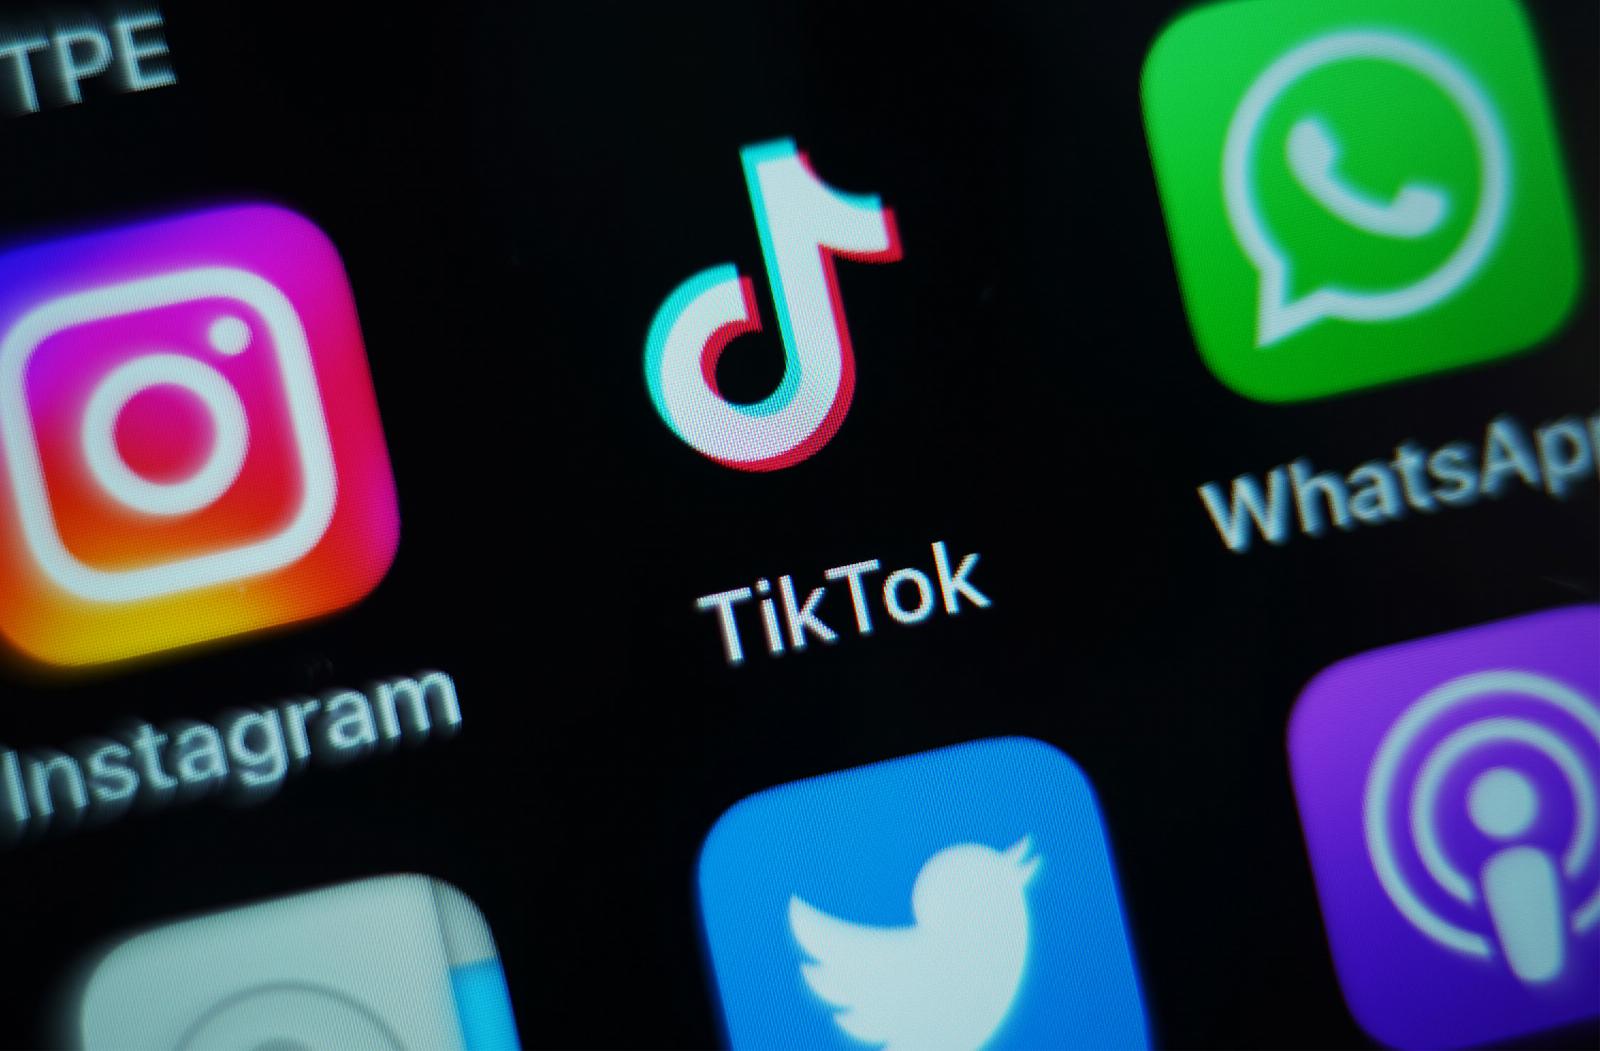 Code suggests that TikTok could be building an app for photos